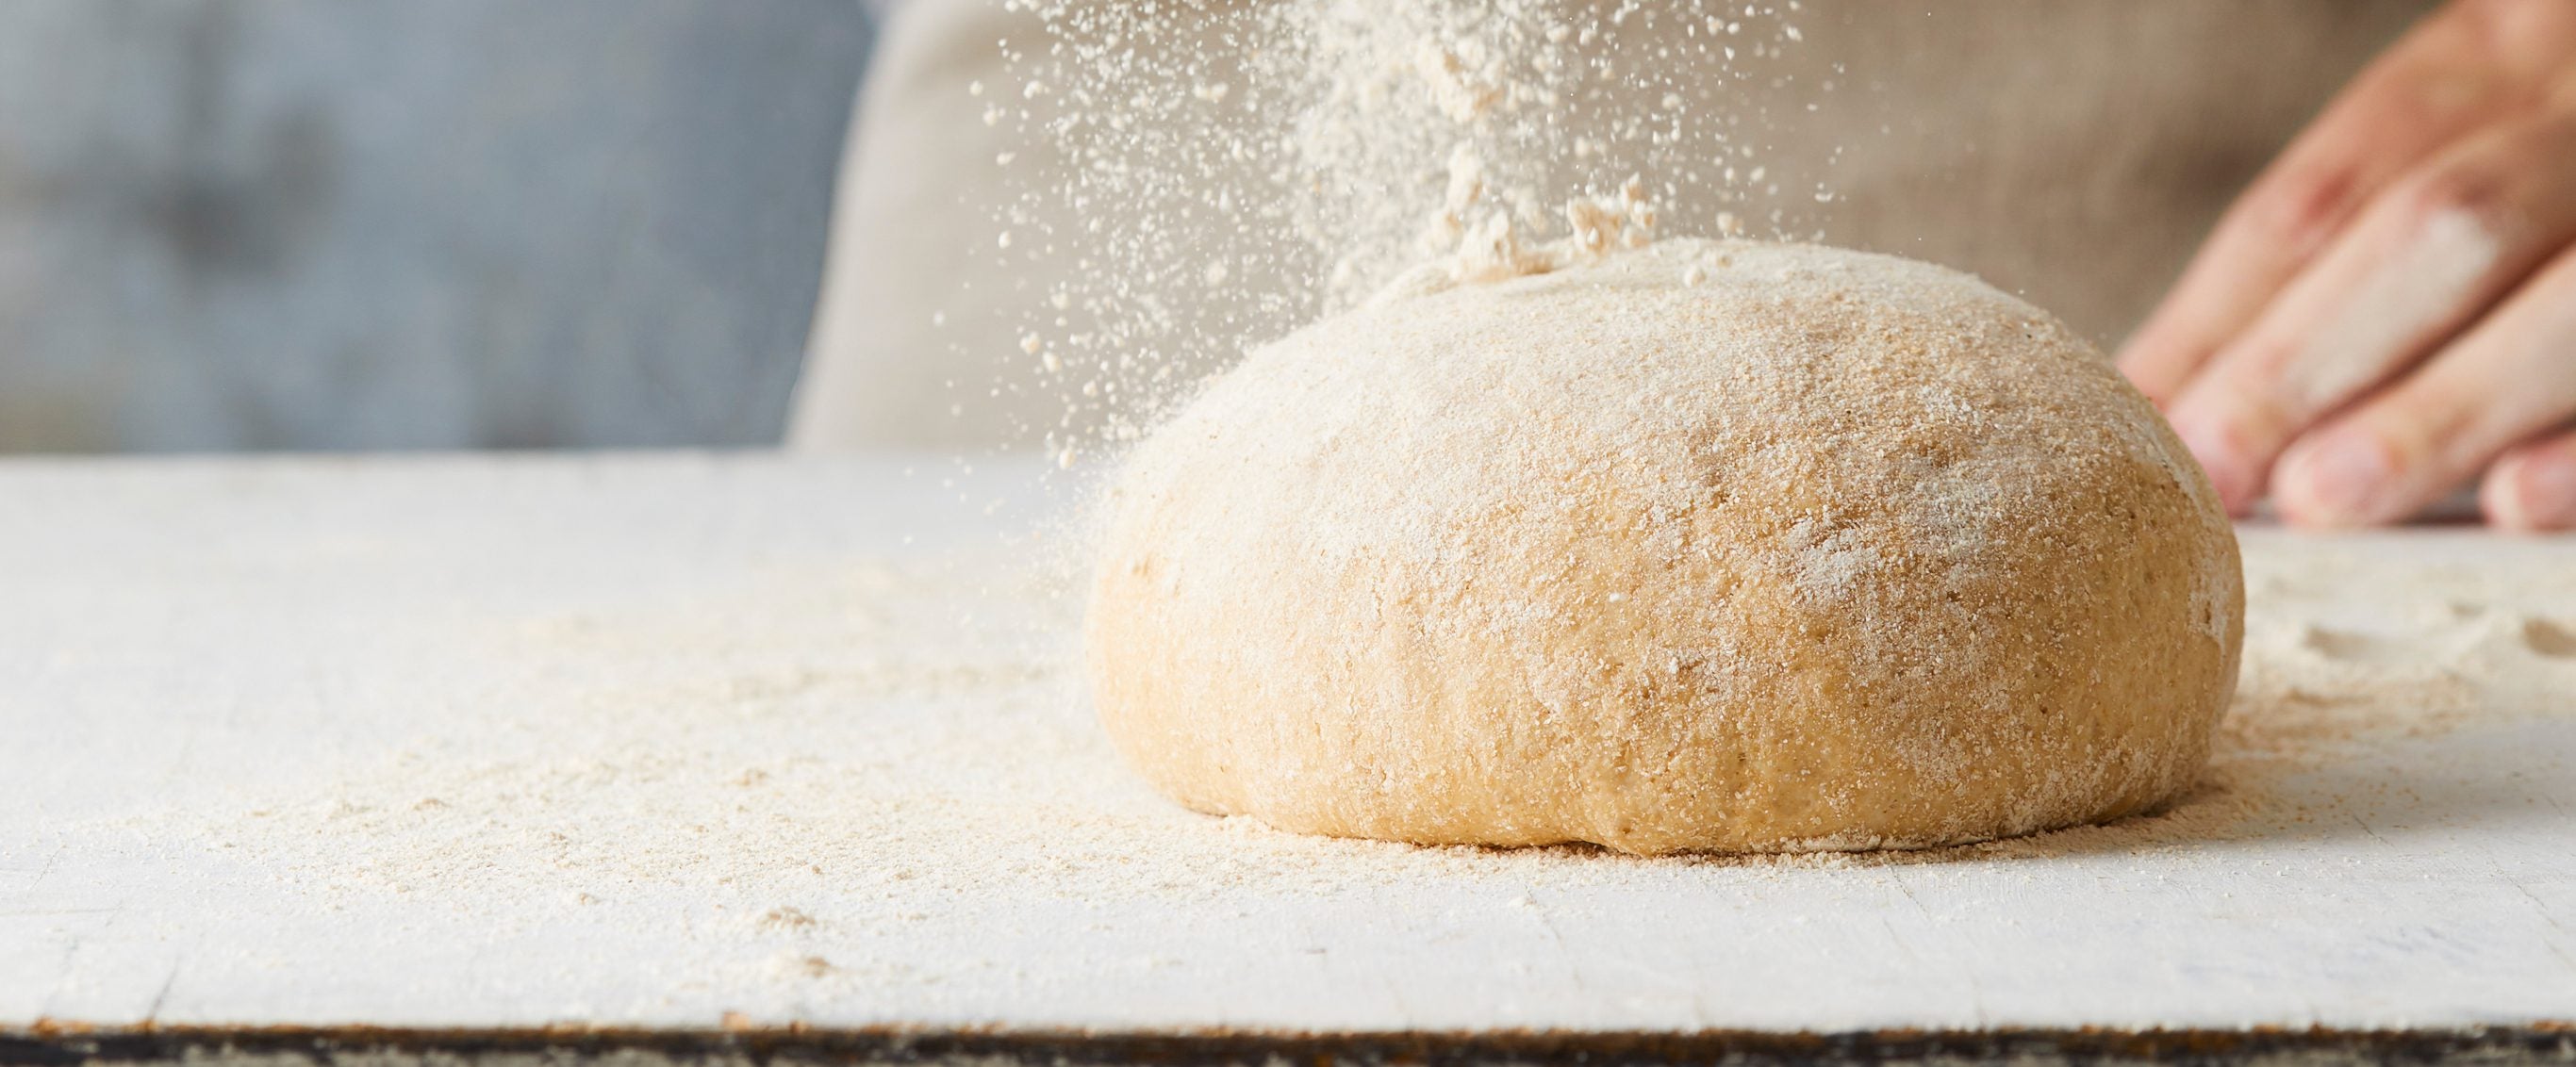 Pizza dough with flour sprinkled over